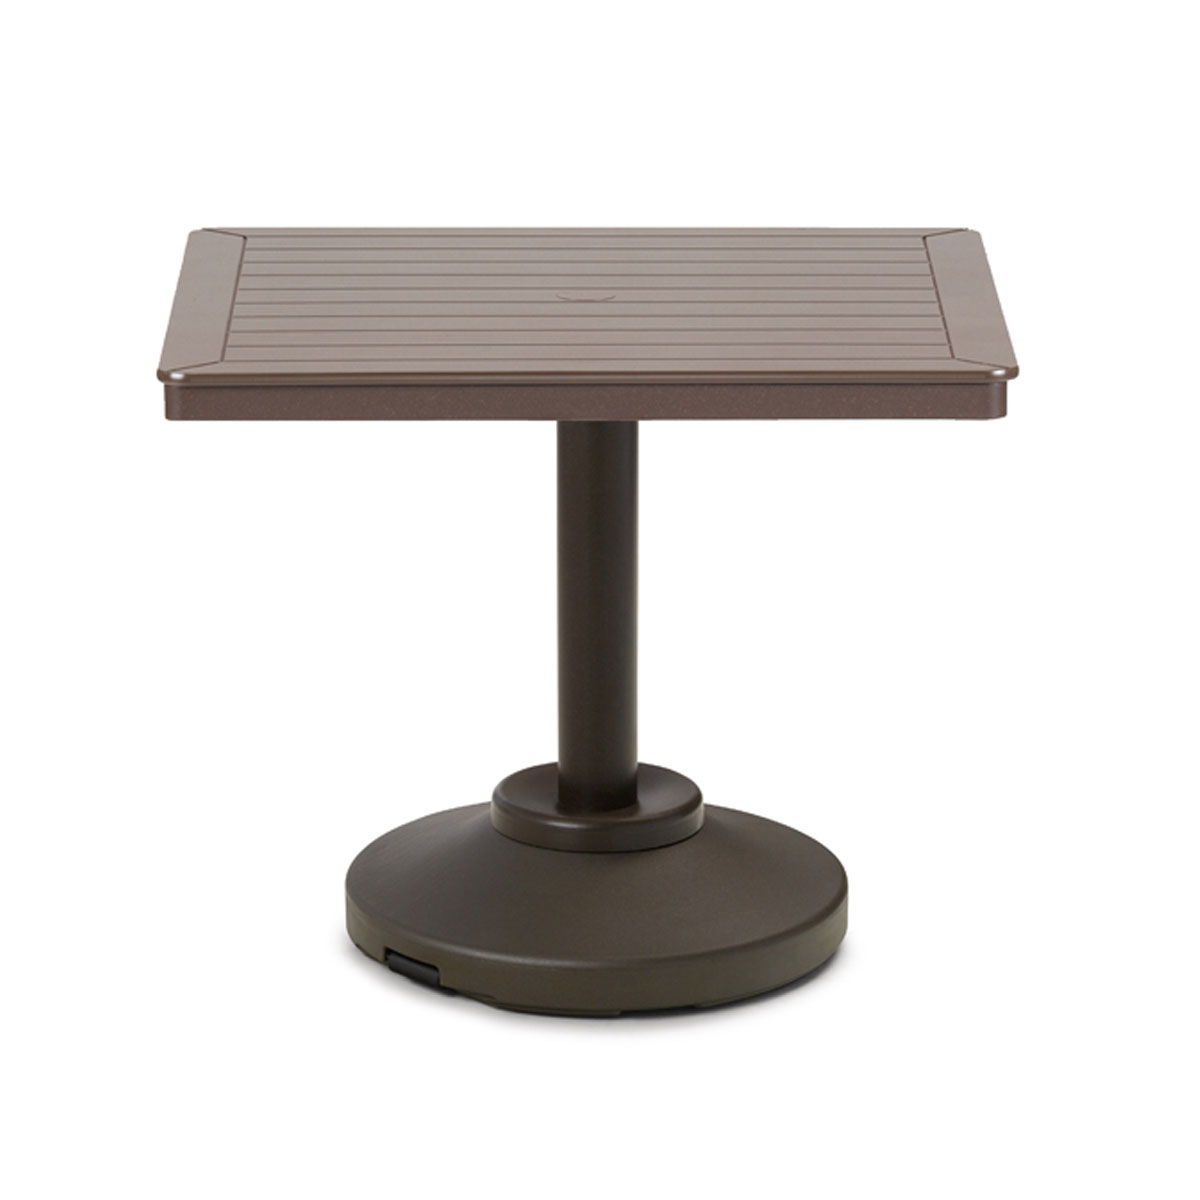 32" Square Dining Height Table with 80lb Pedestal Base